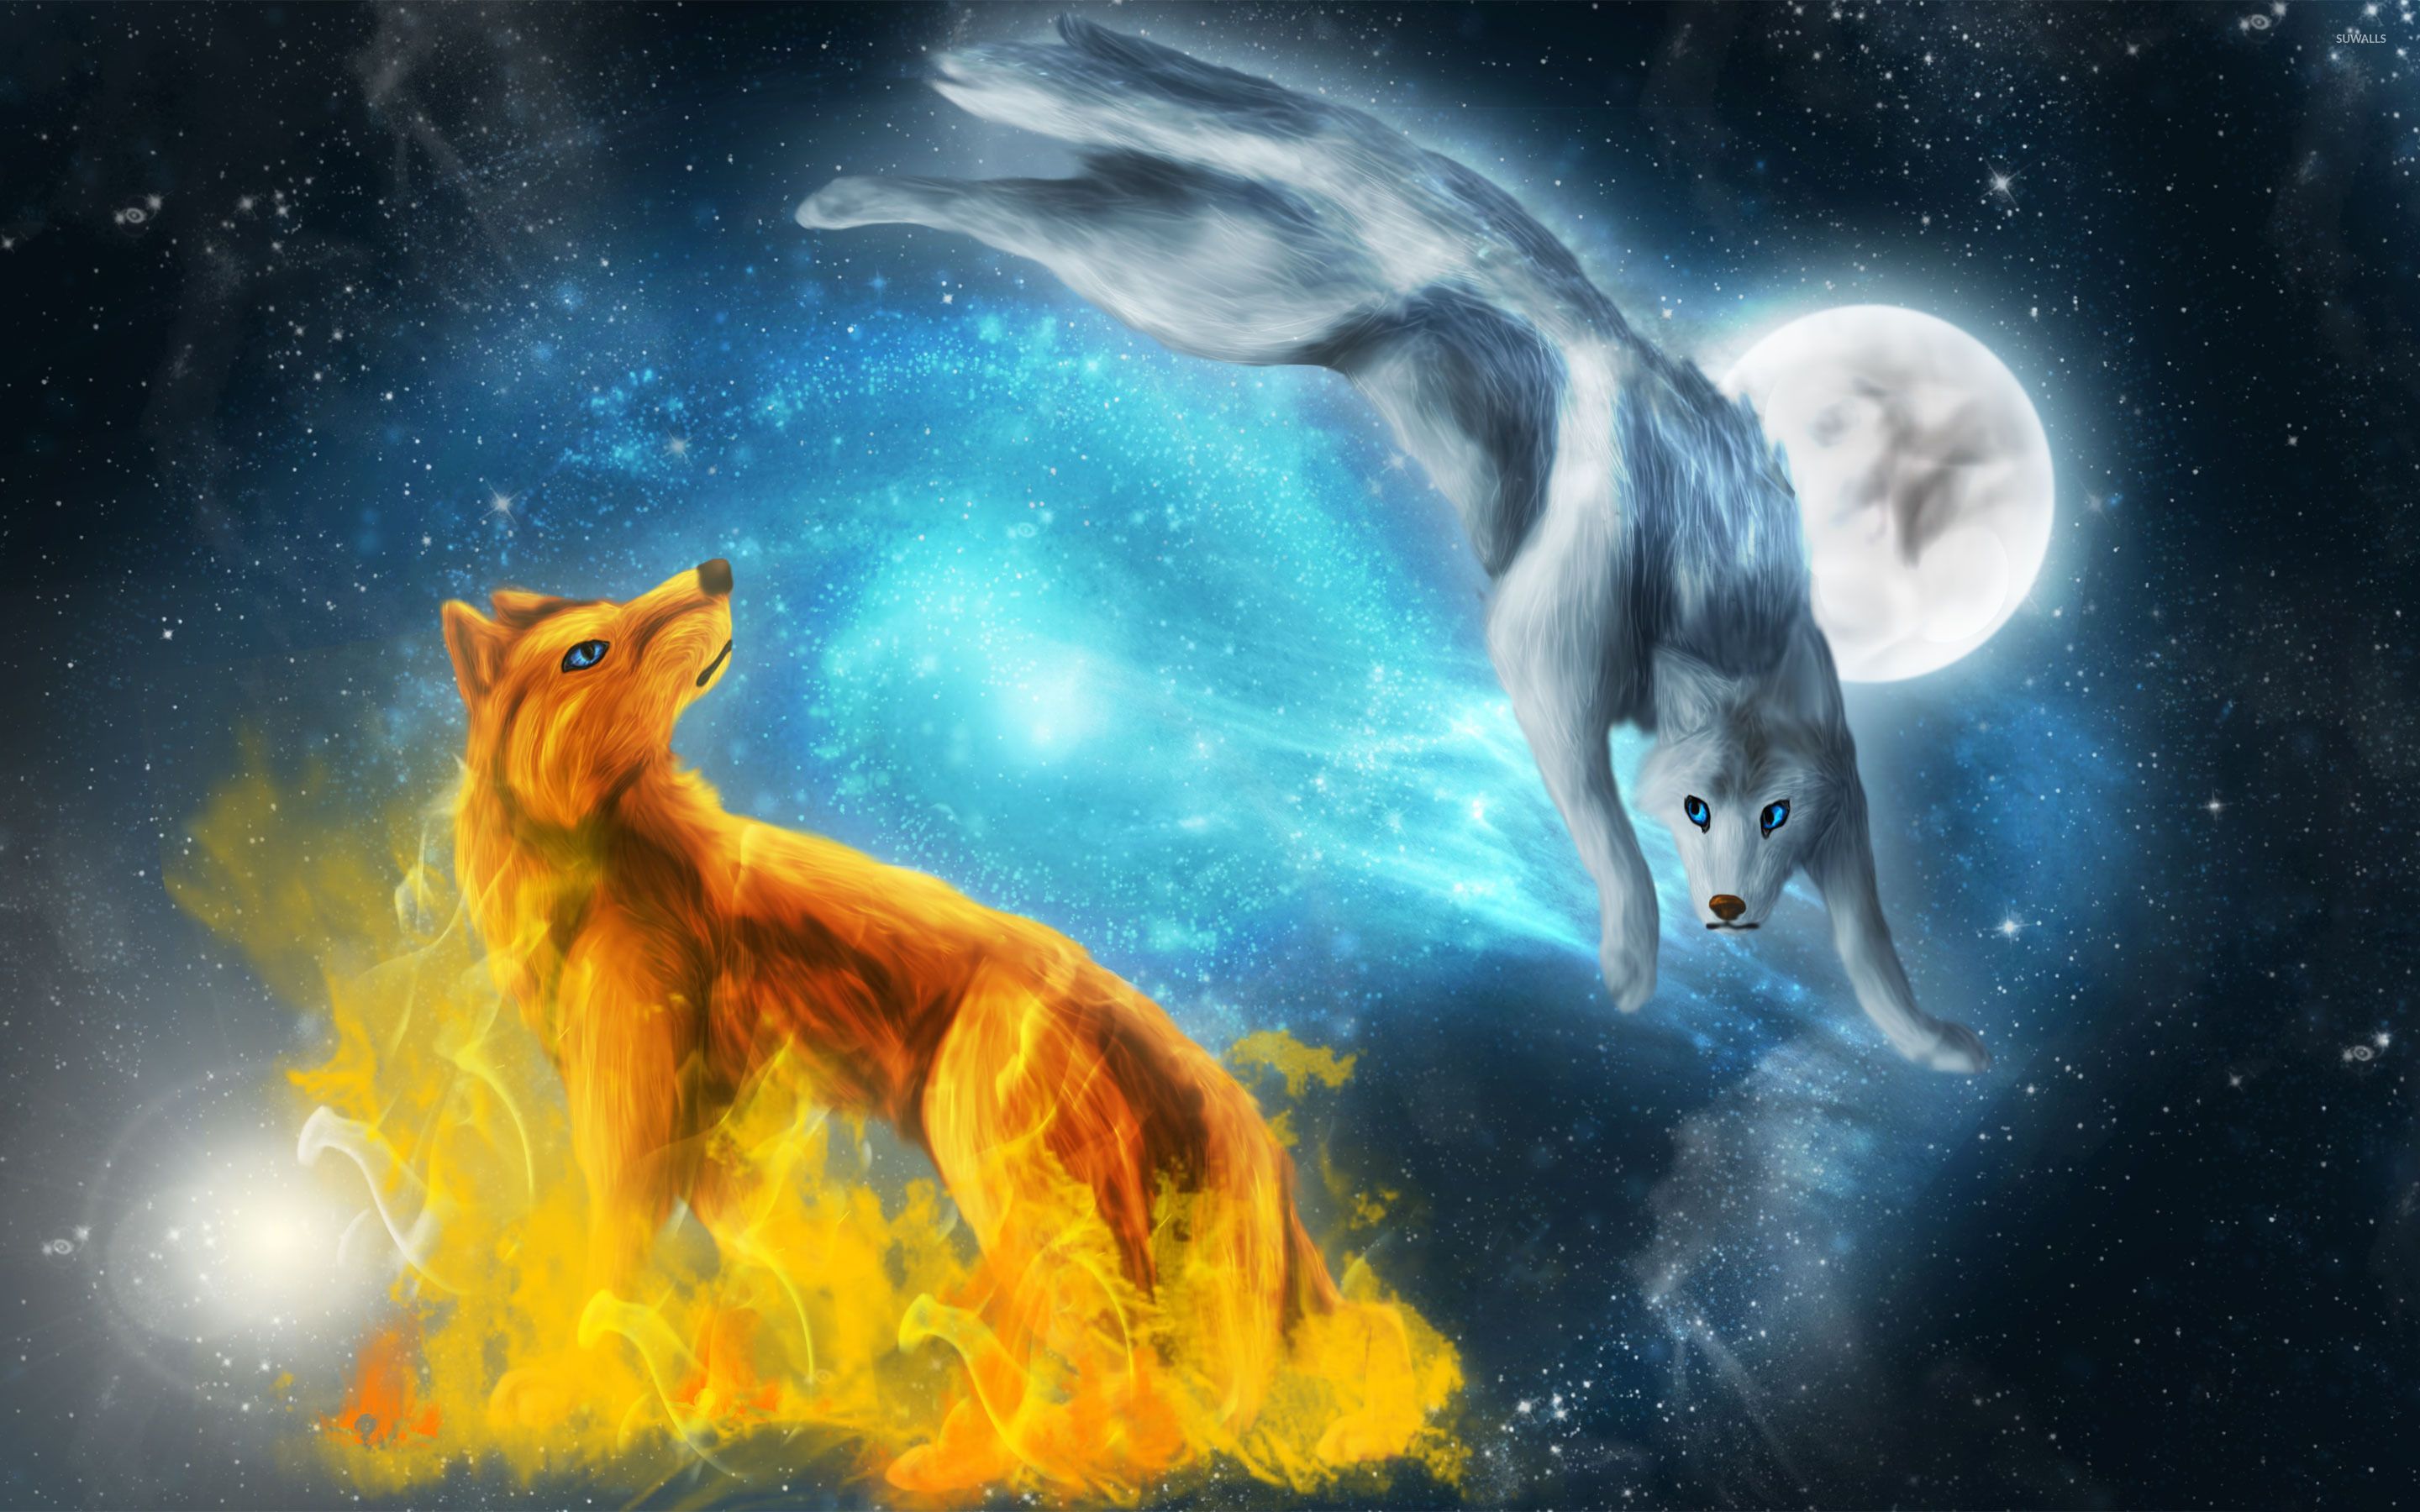 Cute Fox and Wolf Wallpaper Free Cute Fox and Wolf Background